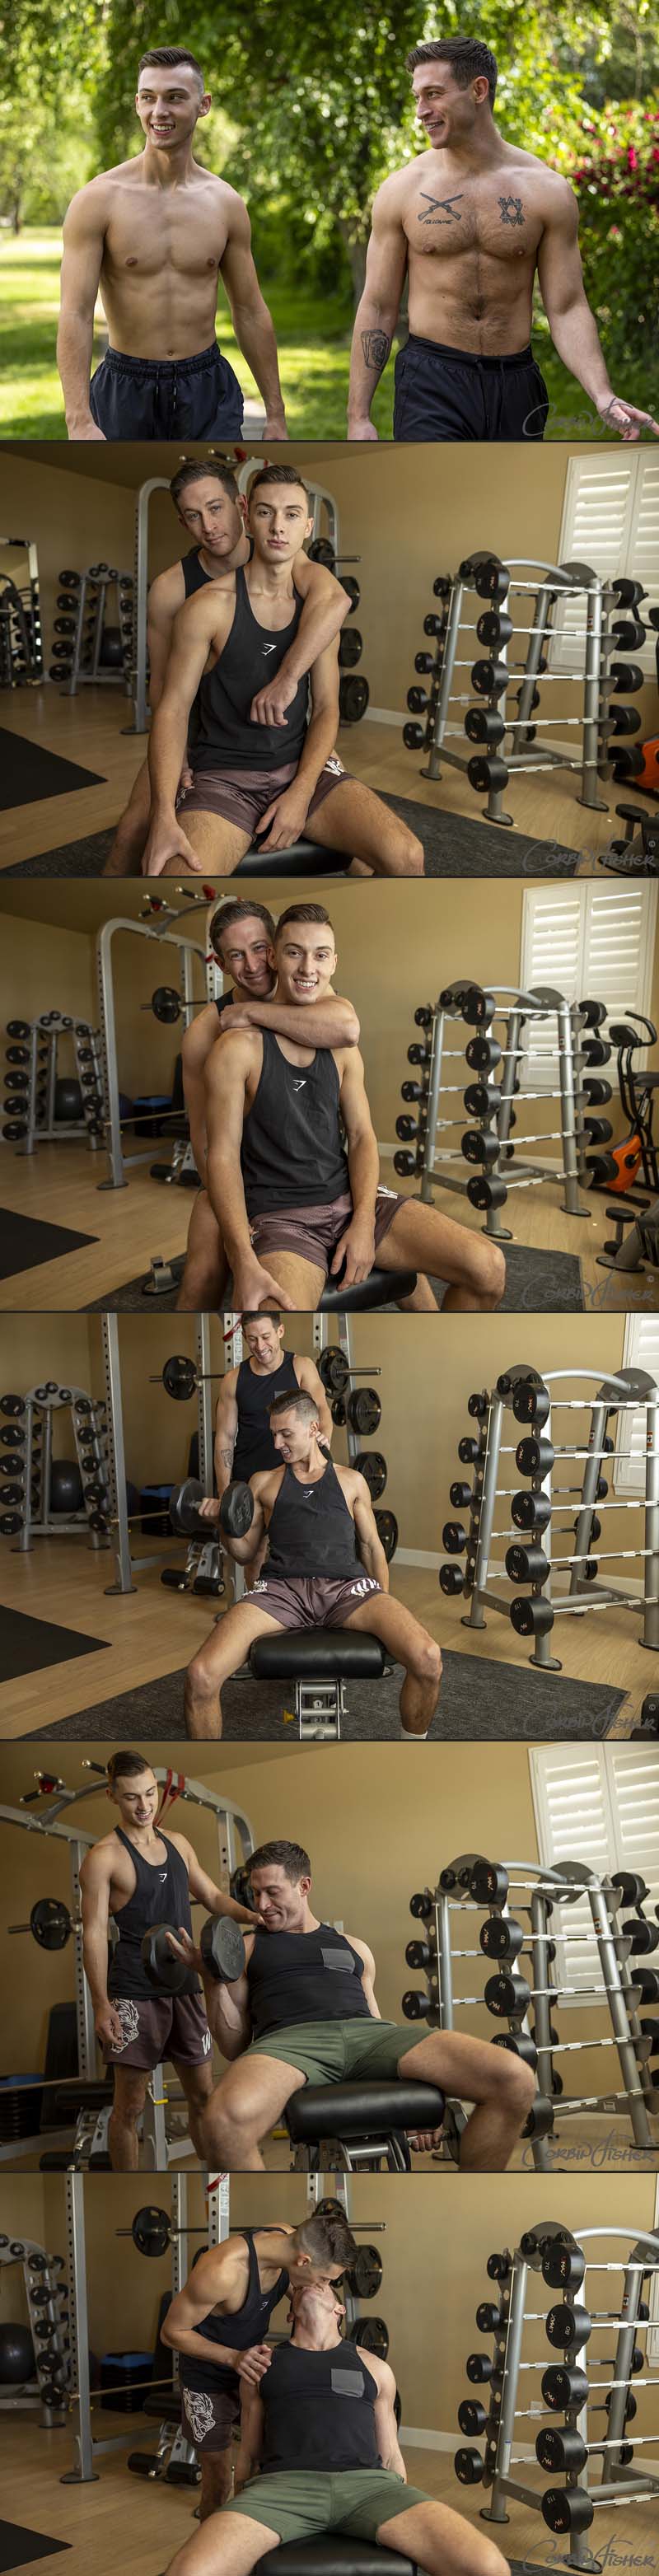 Barron Works Out Chris at CorbinFisher